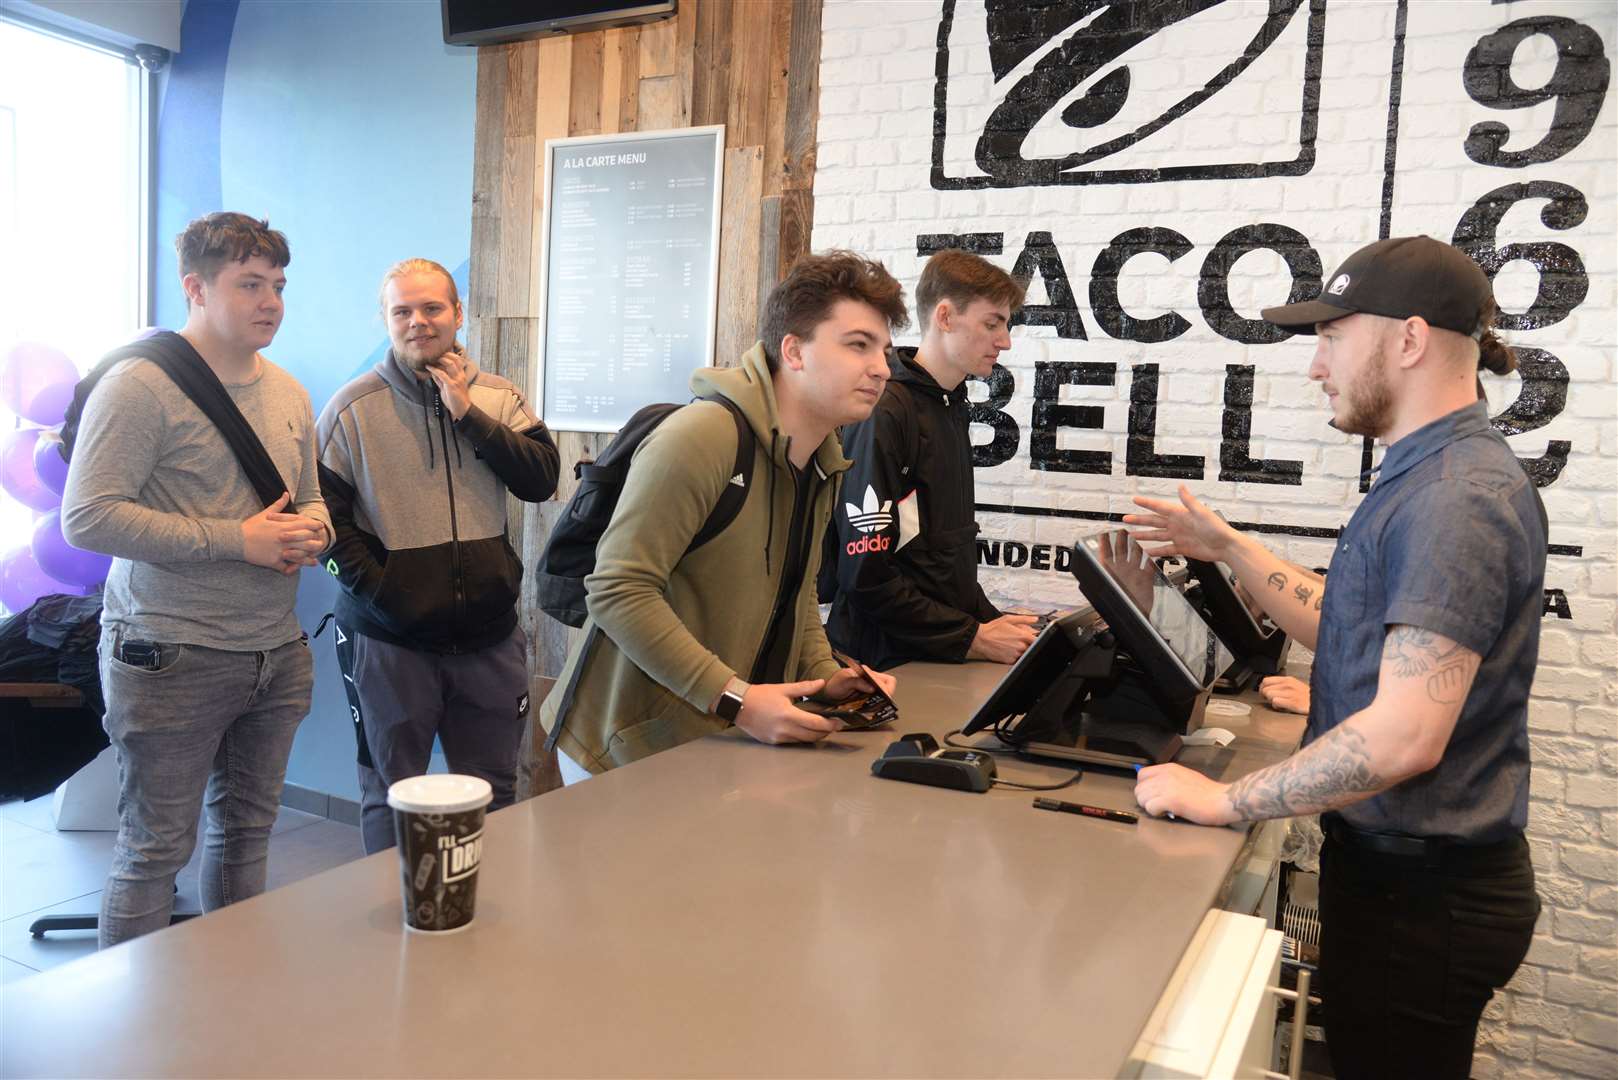 Giant firm Taco Bell wants to take move into the old Jigsaw clothes store in Canterbury